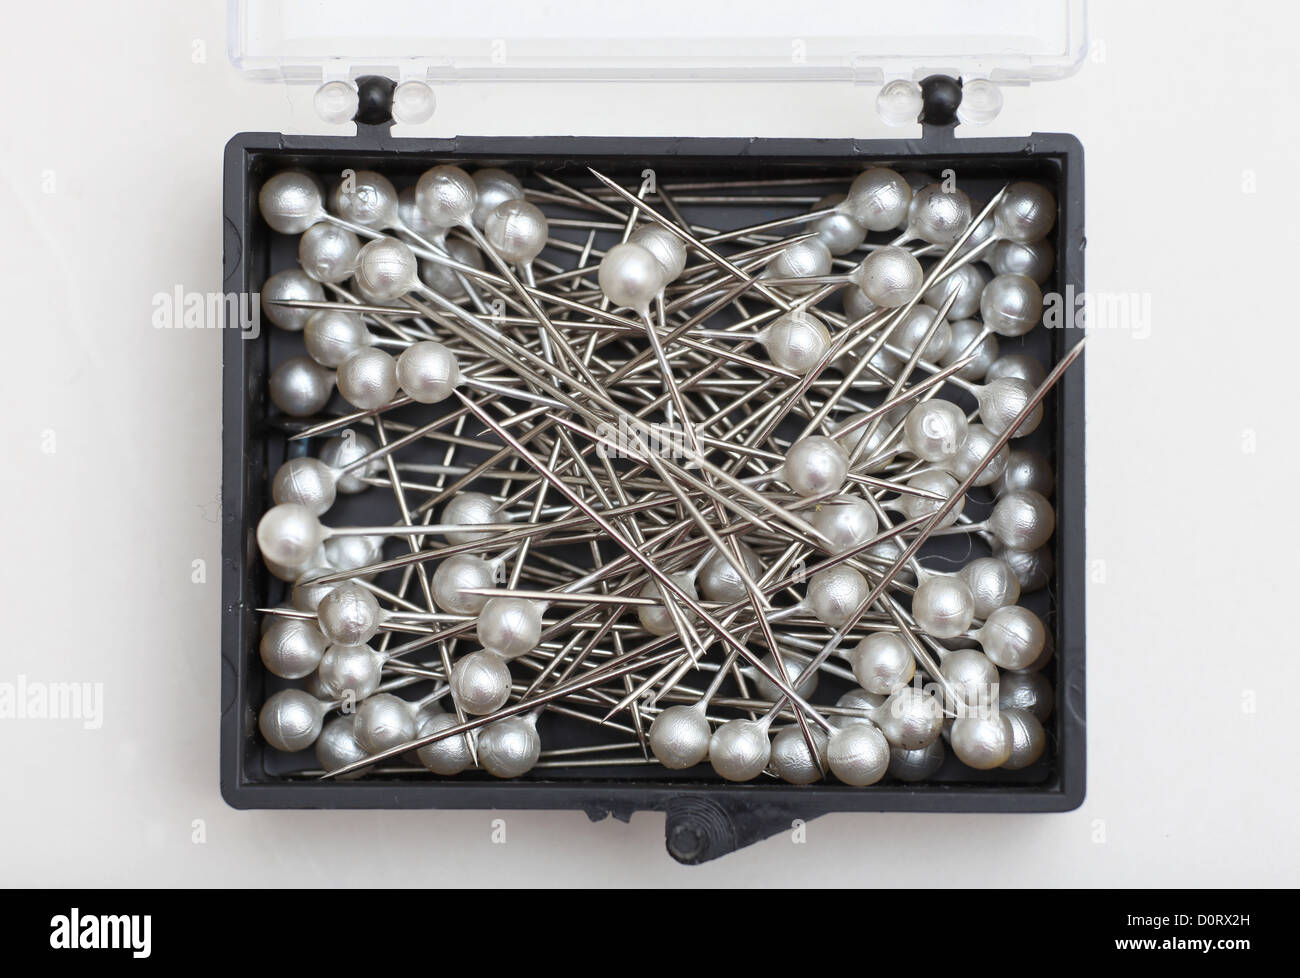 Pins used for sewing, Needlework and embroidery. Stock Photo